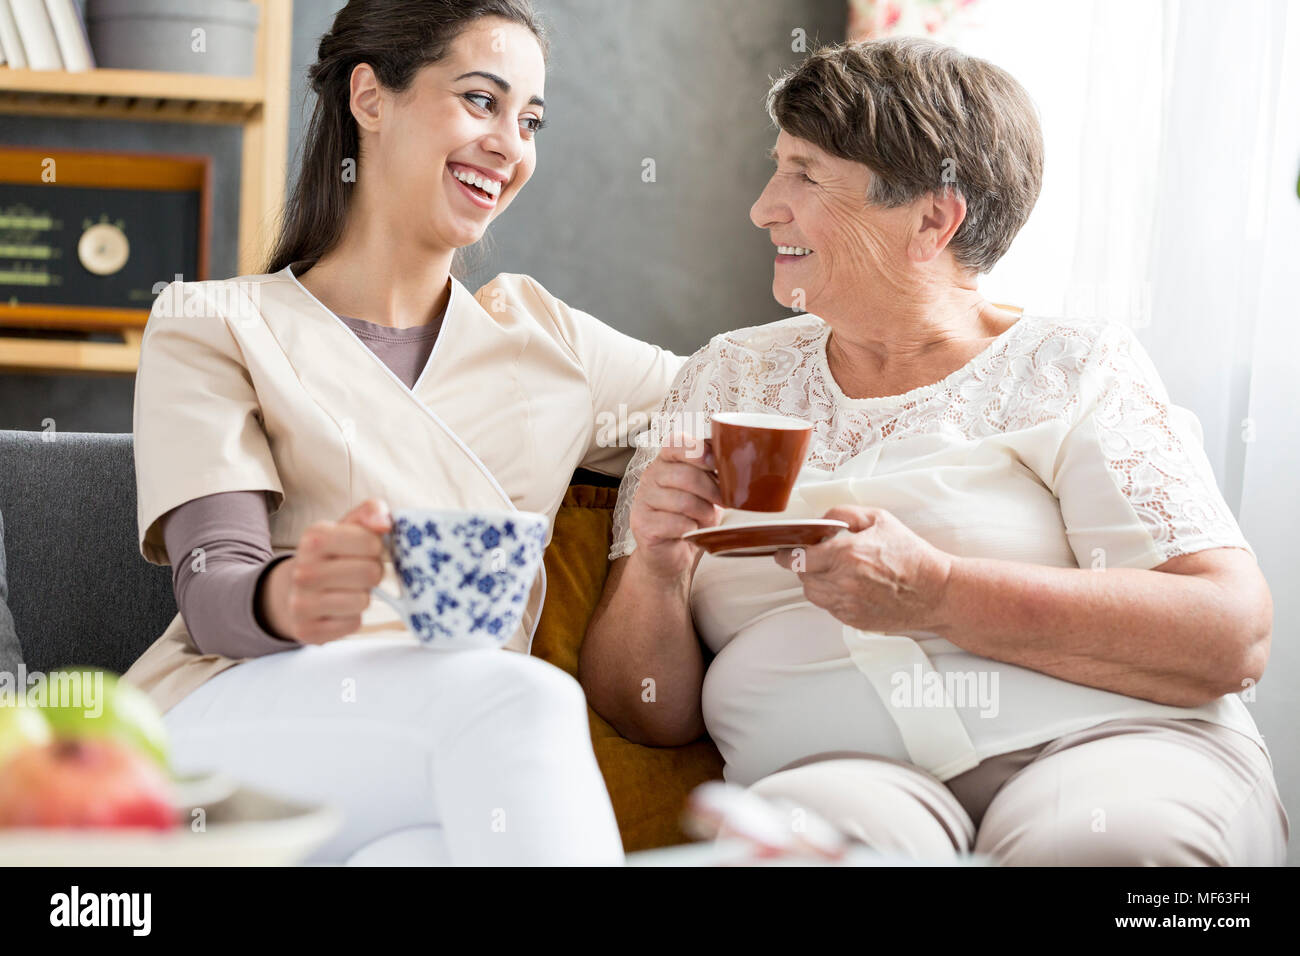 Smiling volunteer drinking coffee with a senior patient in a nursing home Stock Photo